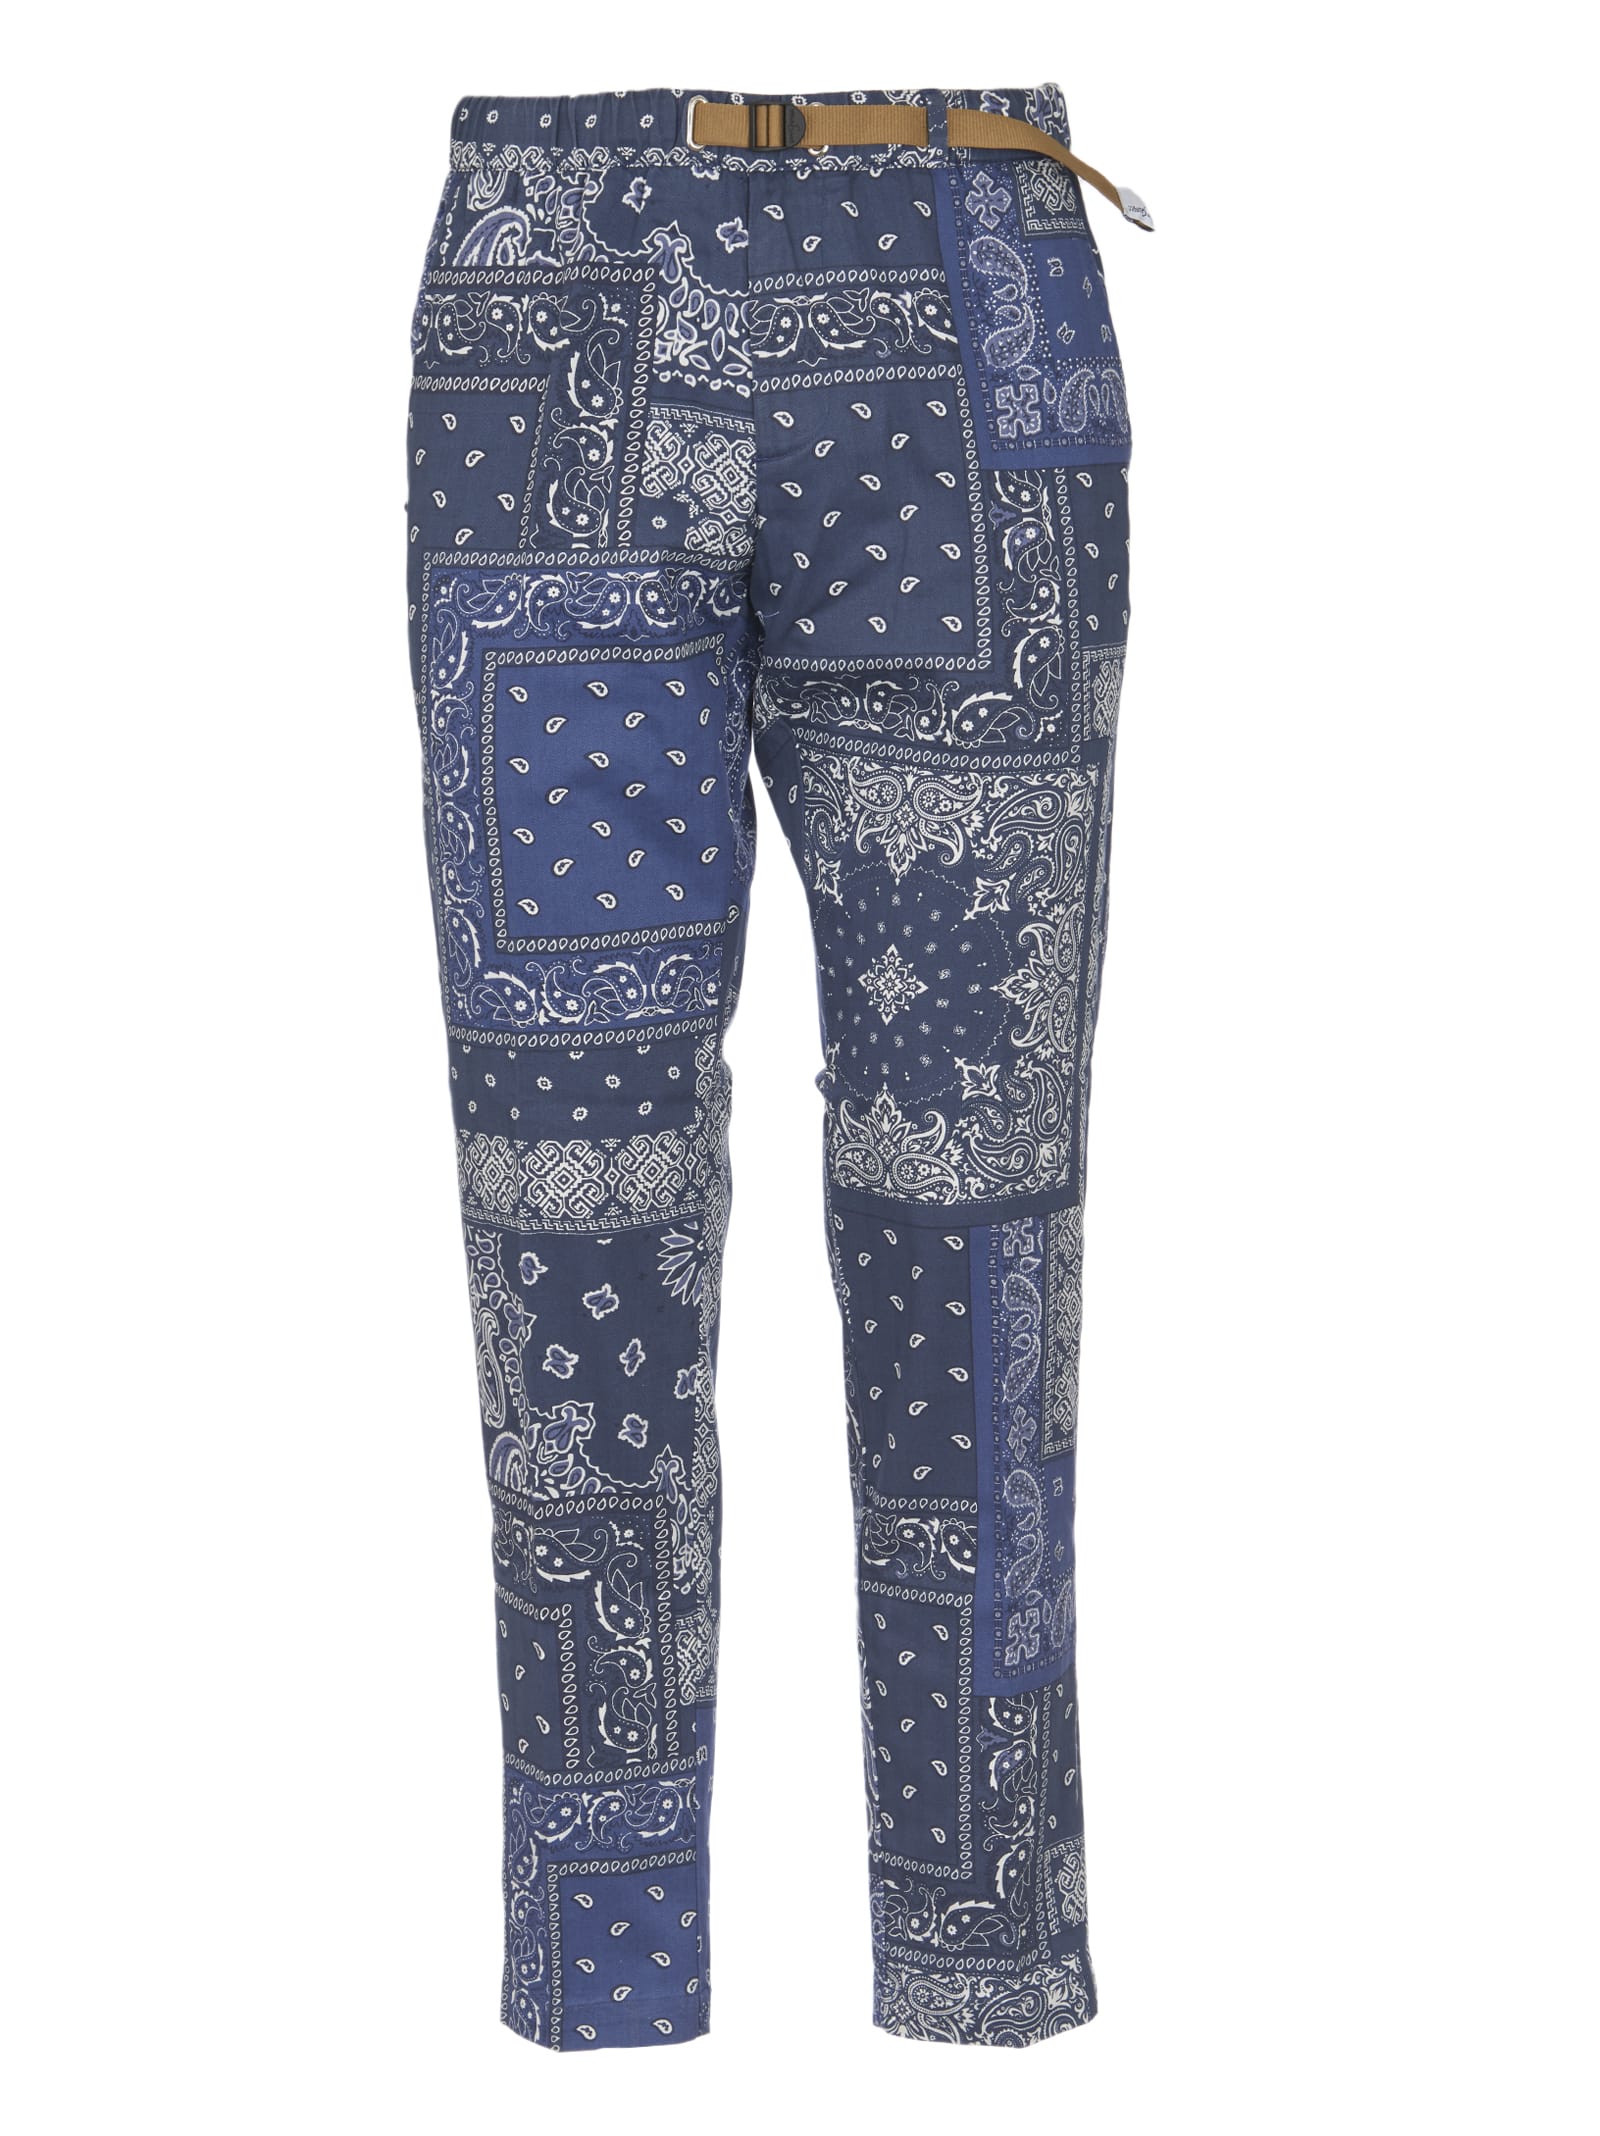 WhiteSand Paisley Print Belted Trousers